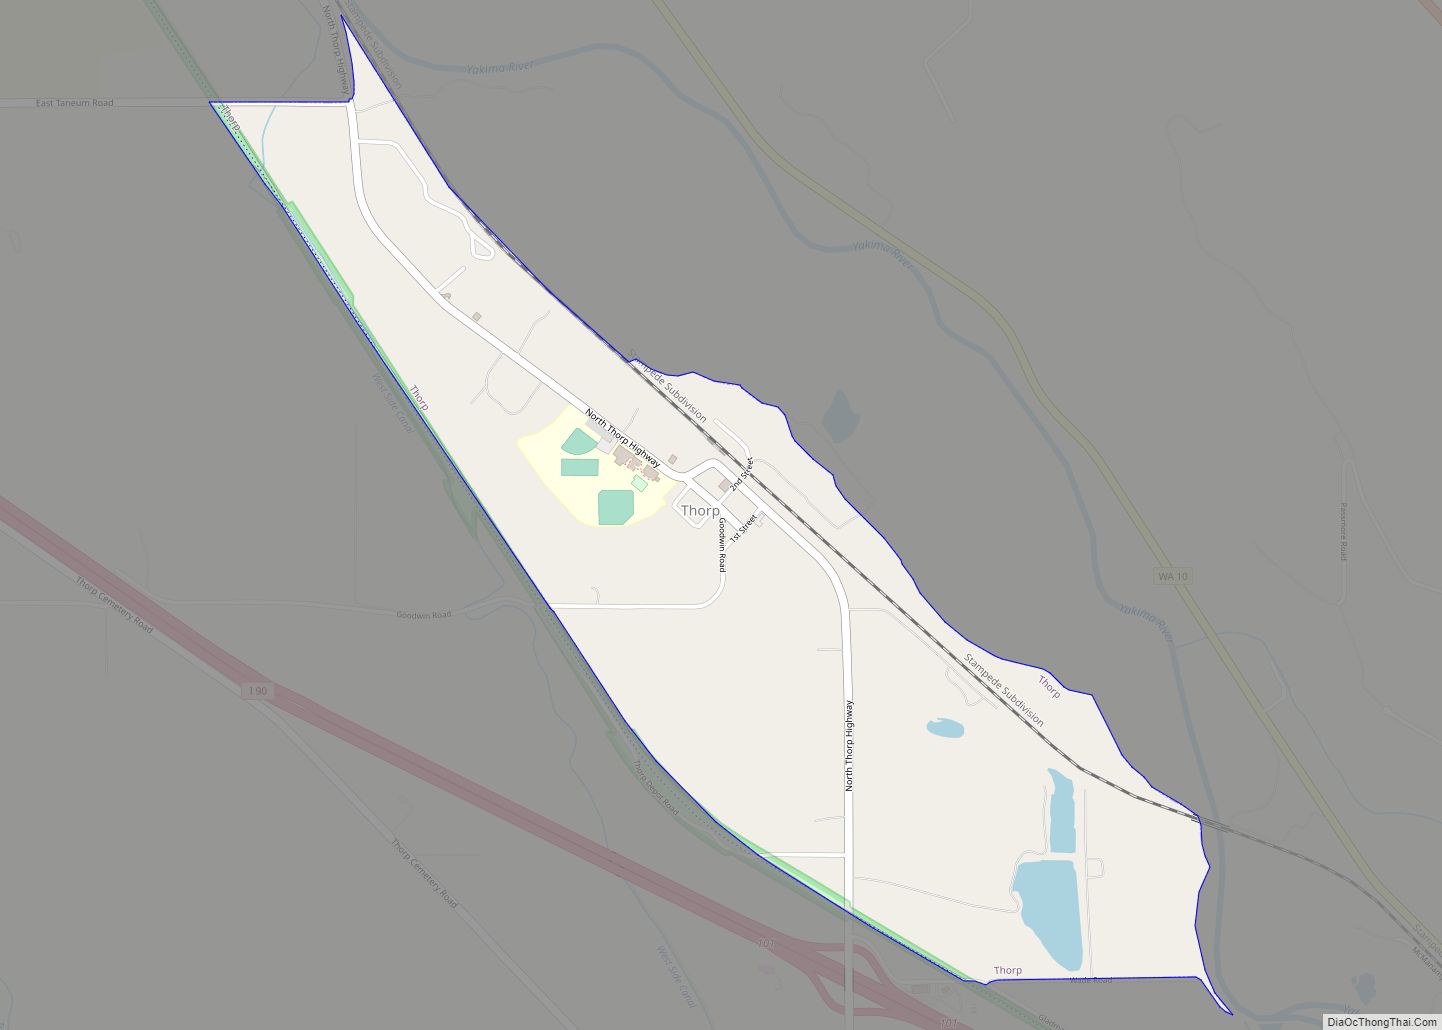 Map of Thorp CDP